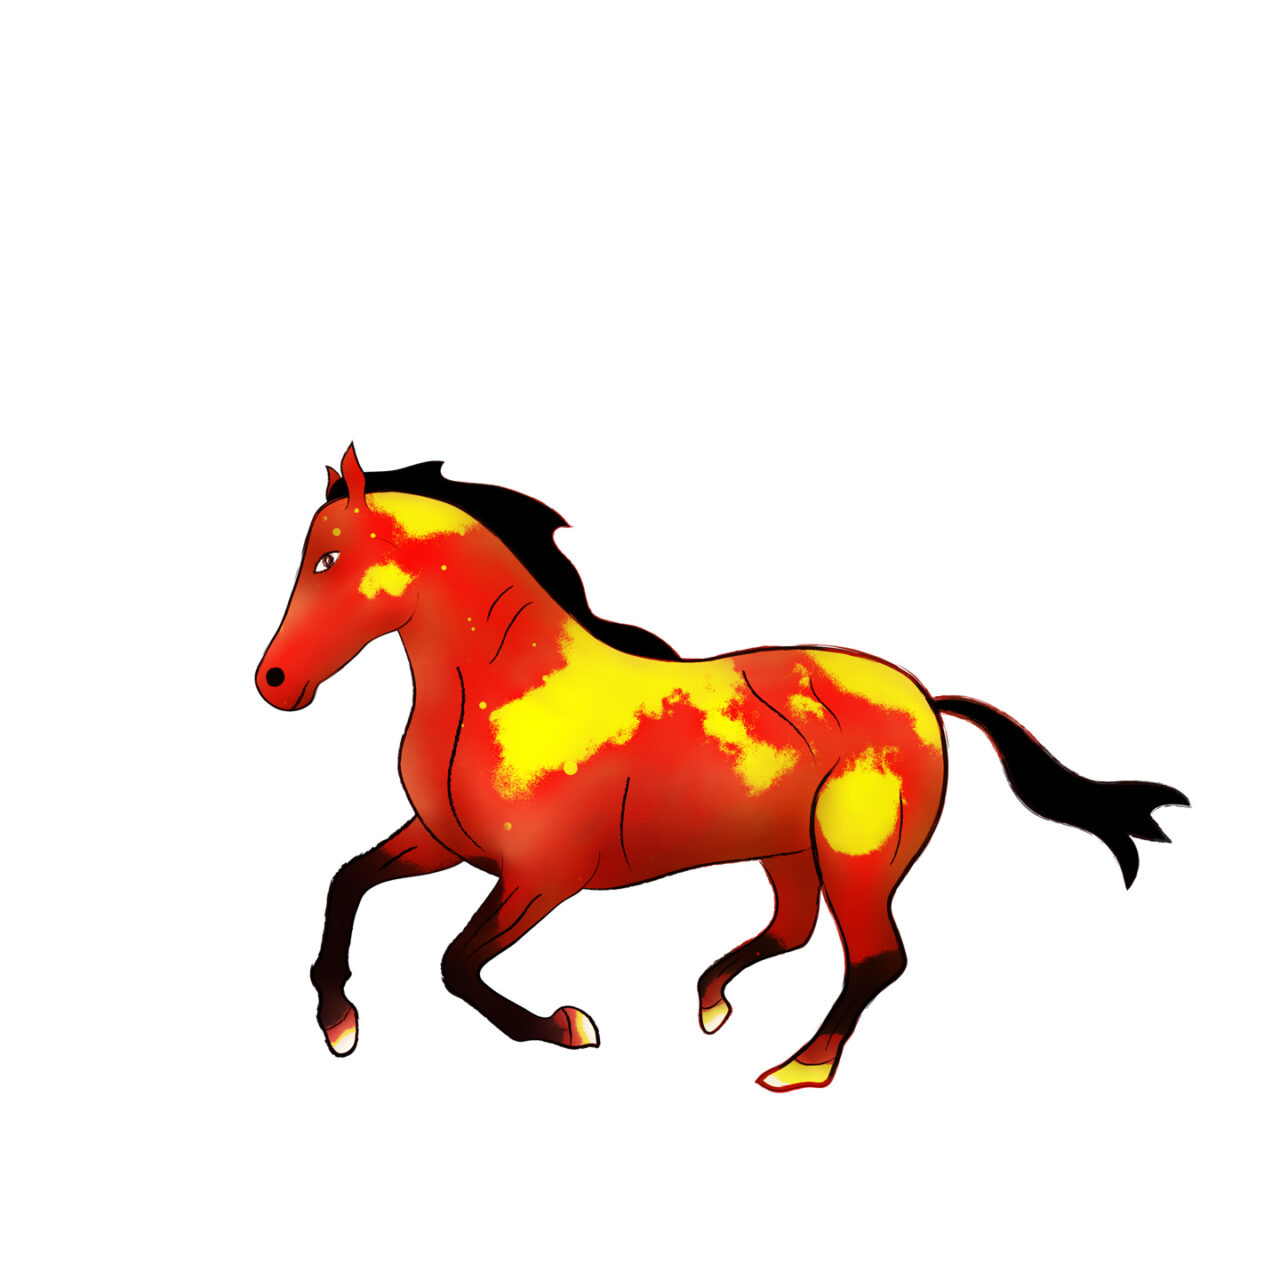 Horse in red, yellow and black colors on a white background